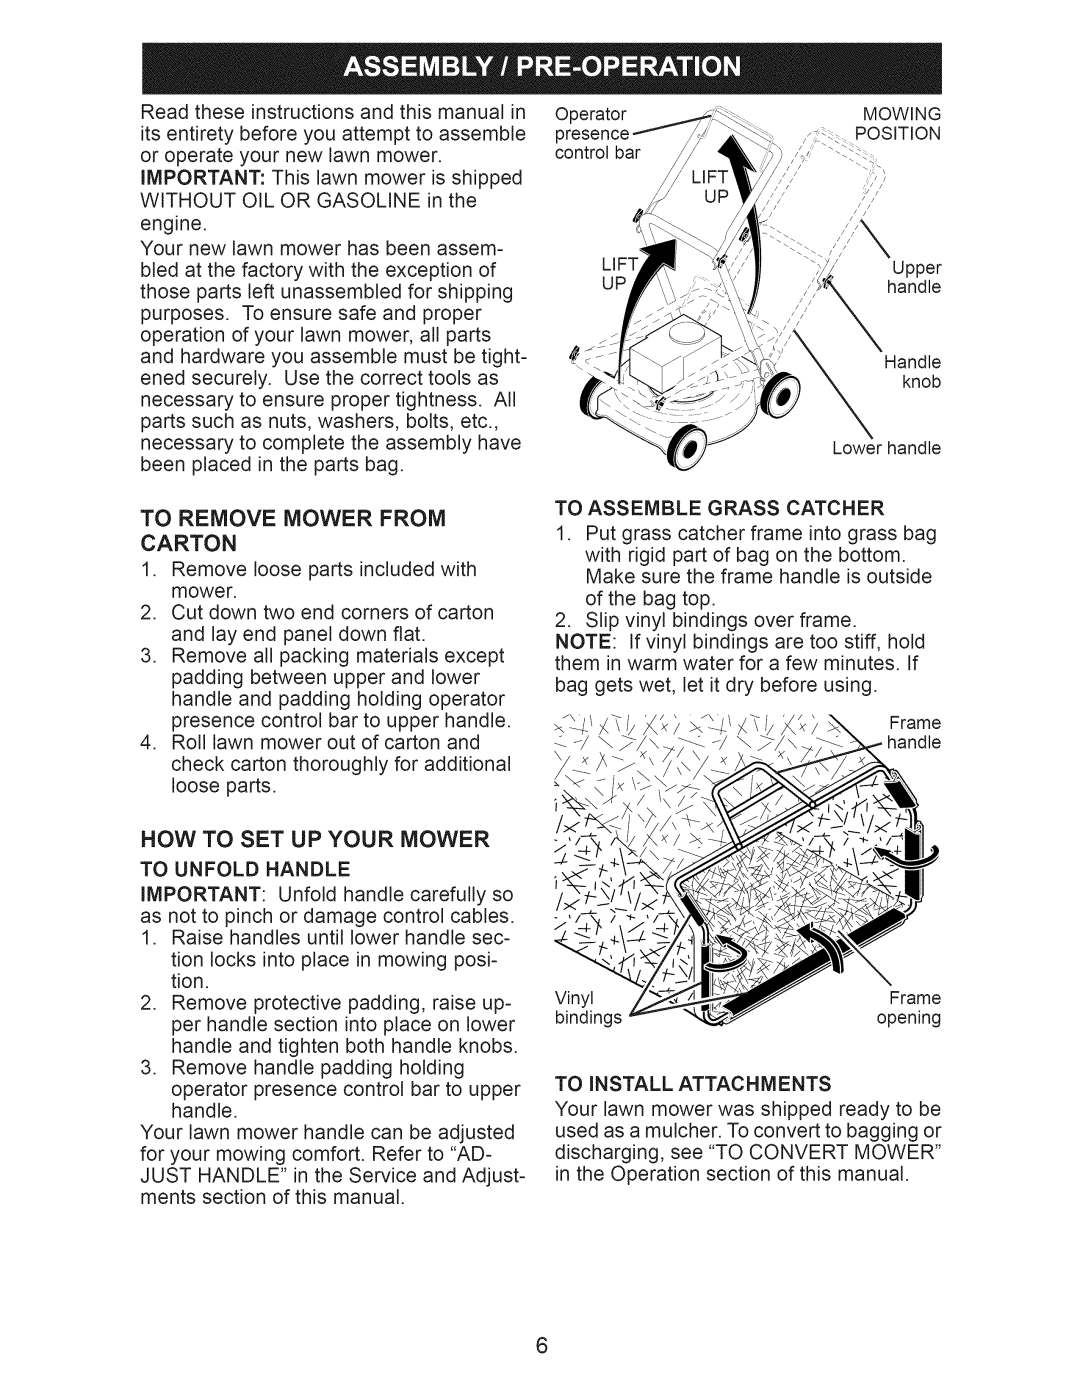 Craftsman 917.389061 owner manual To Remove Mower From Carton, Now To Set Up Your Mower 